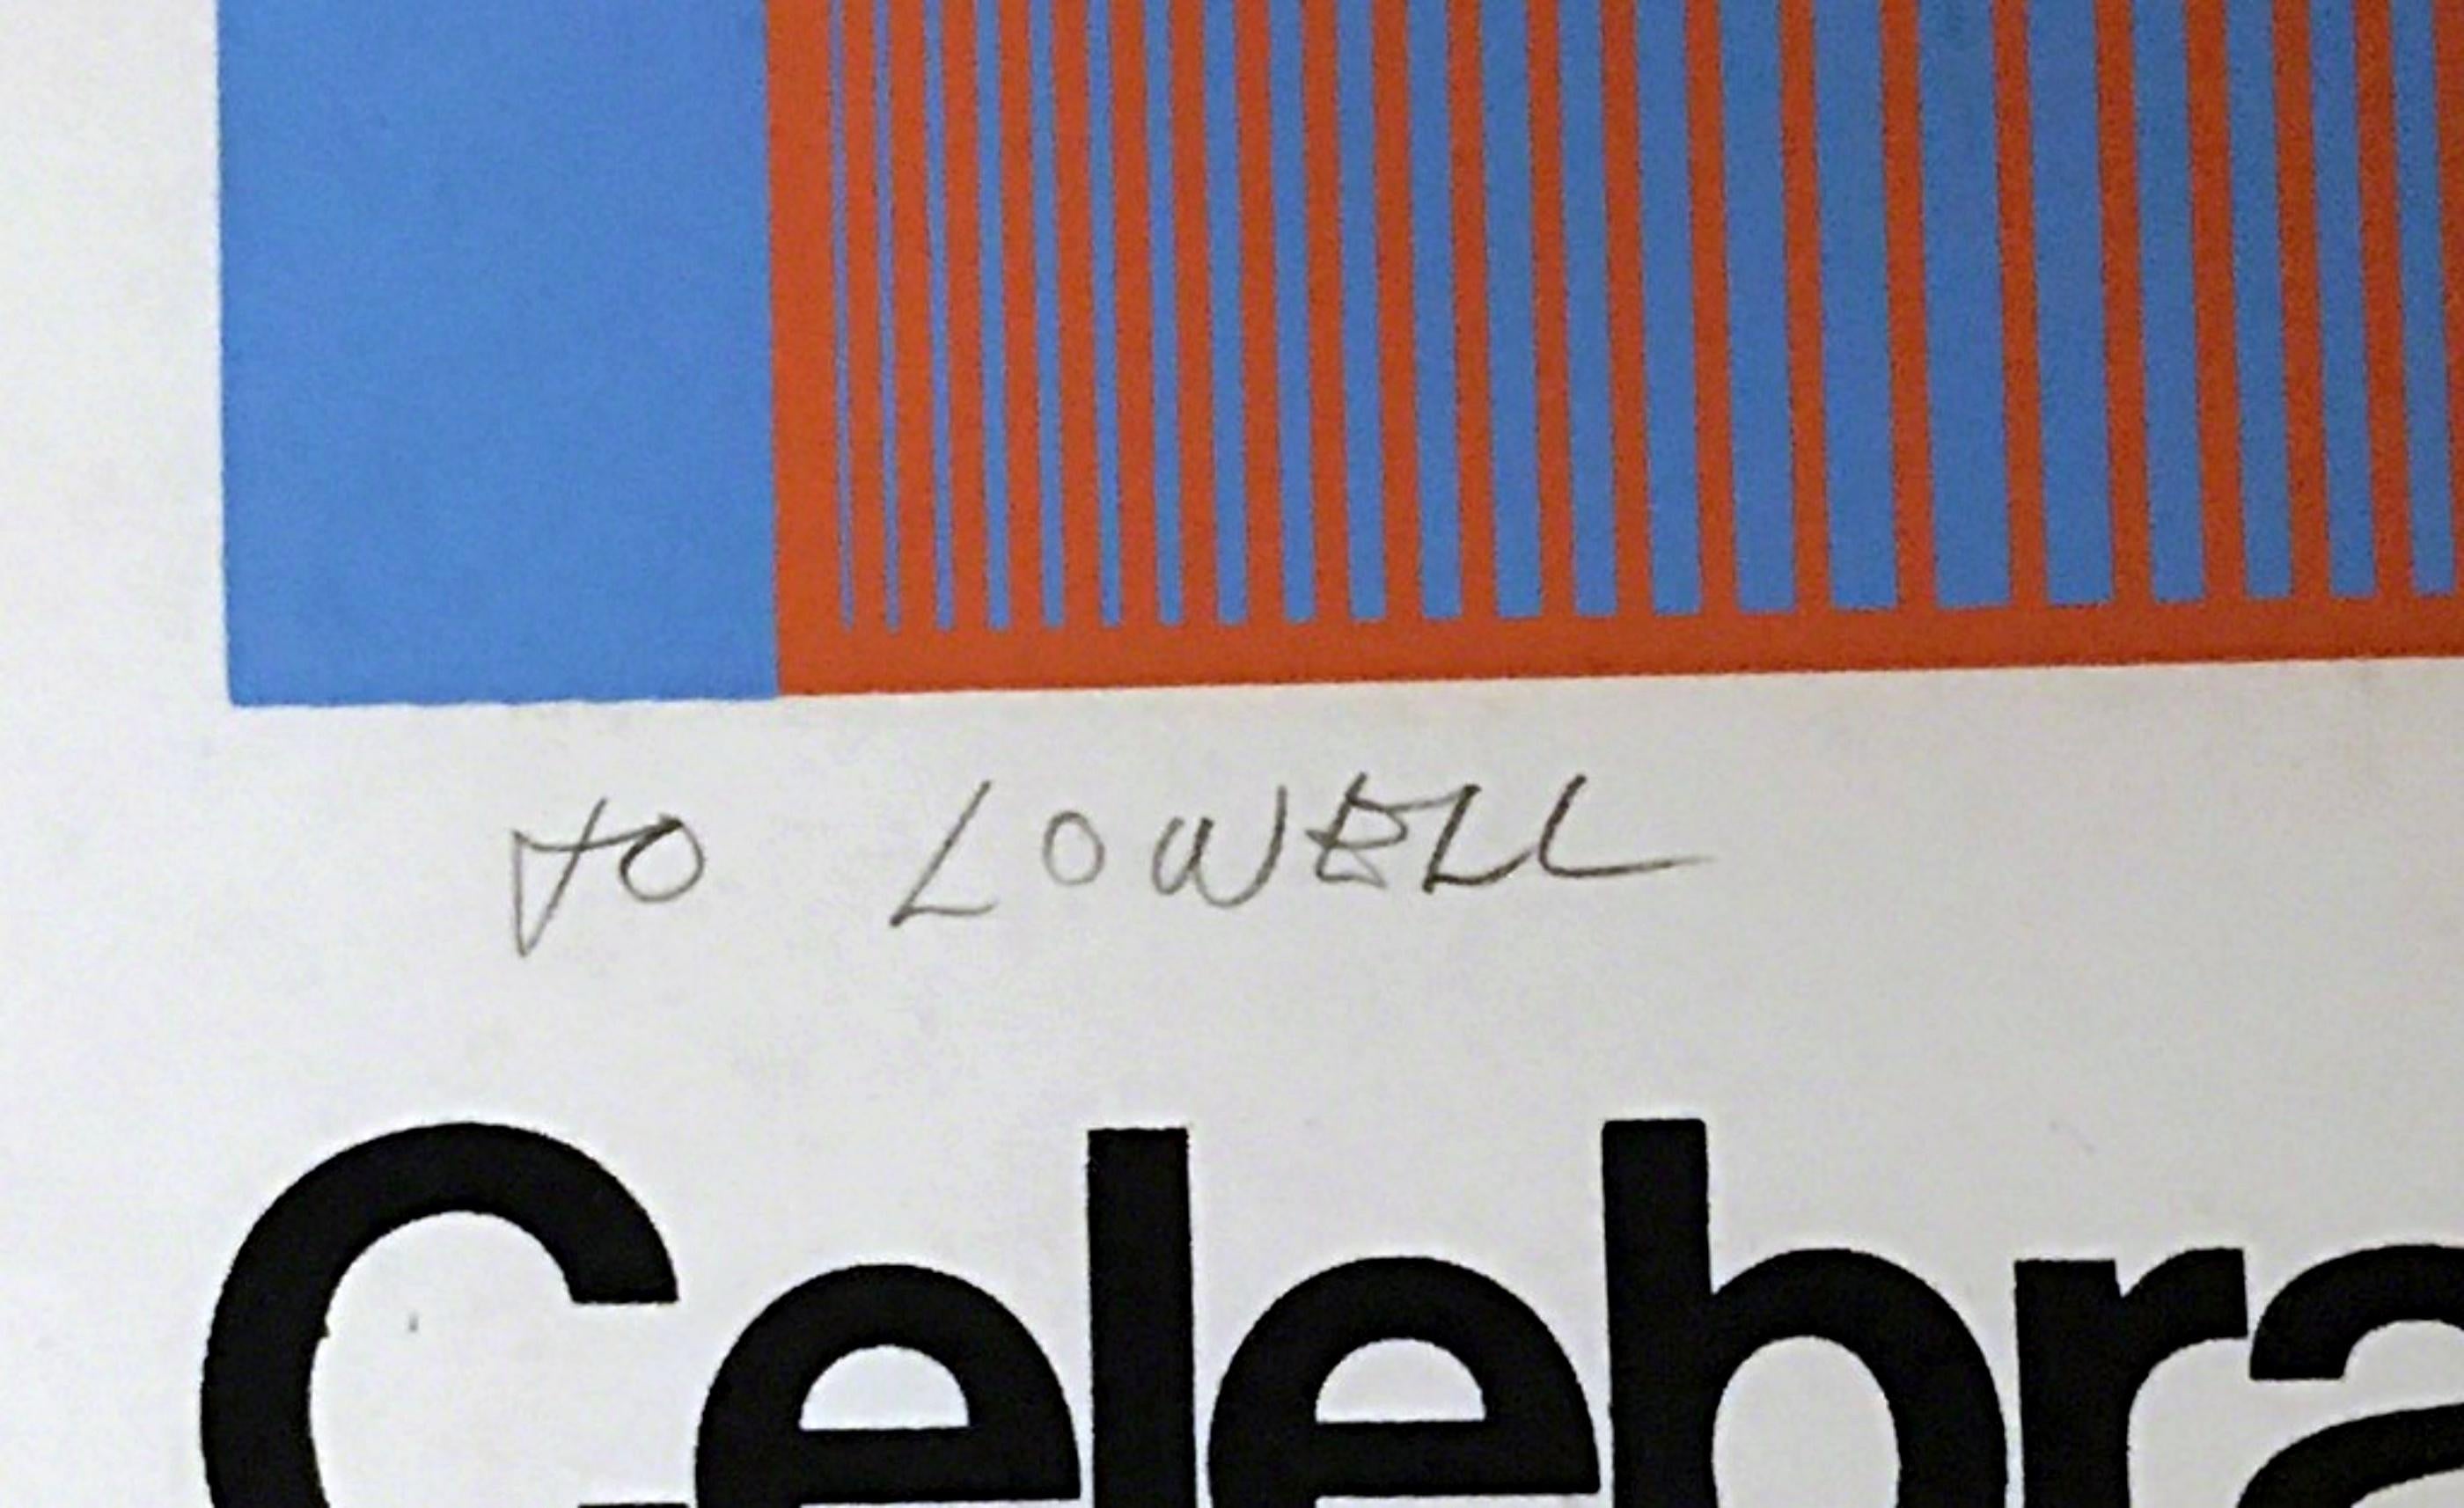 Richard Anuszkiewicz
Celebrate New York (hand signed limited edition poster), 1974
Silkscreen on wove paper
Hand-signed by artist, signed, dated and inscribed 